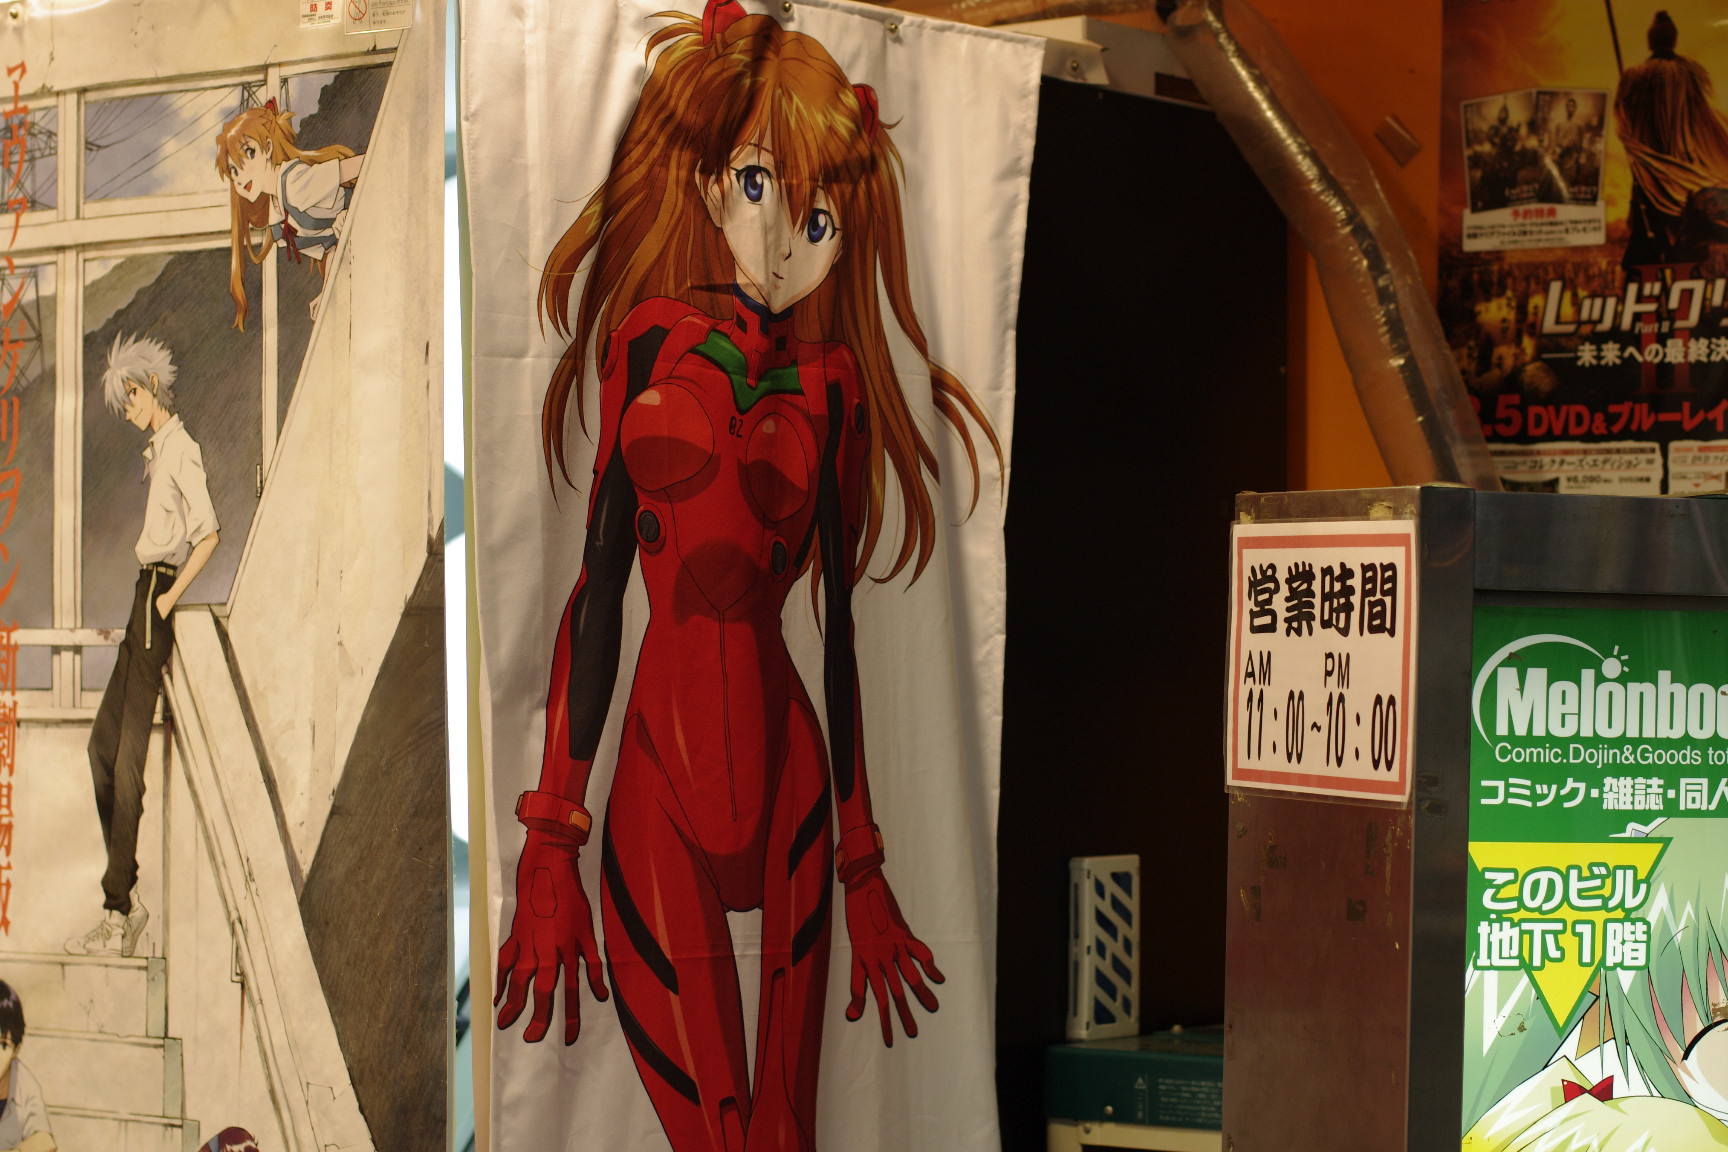 a red haired woman is standing next to poster art